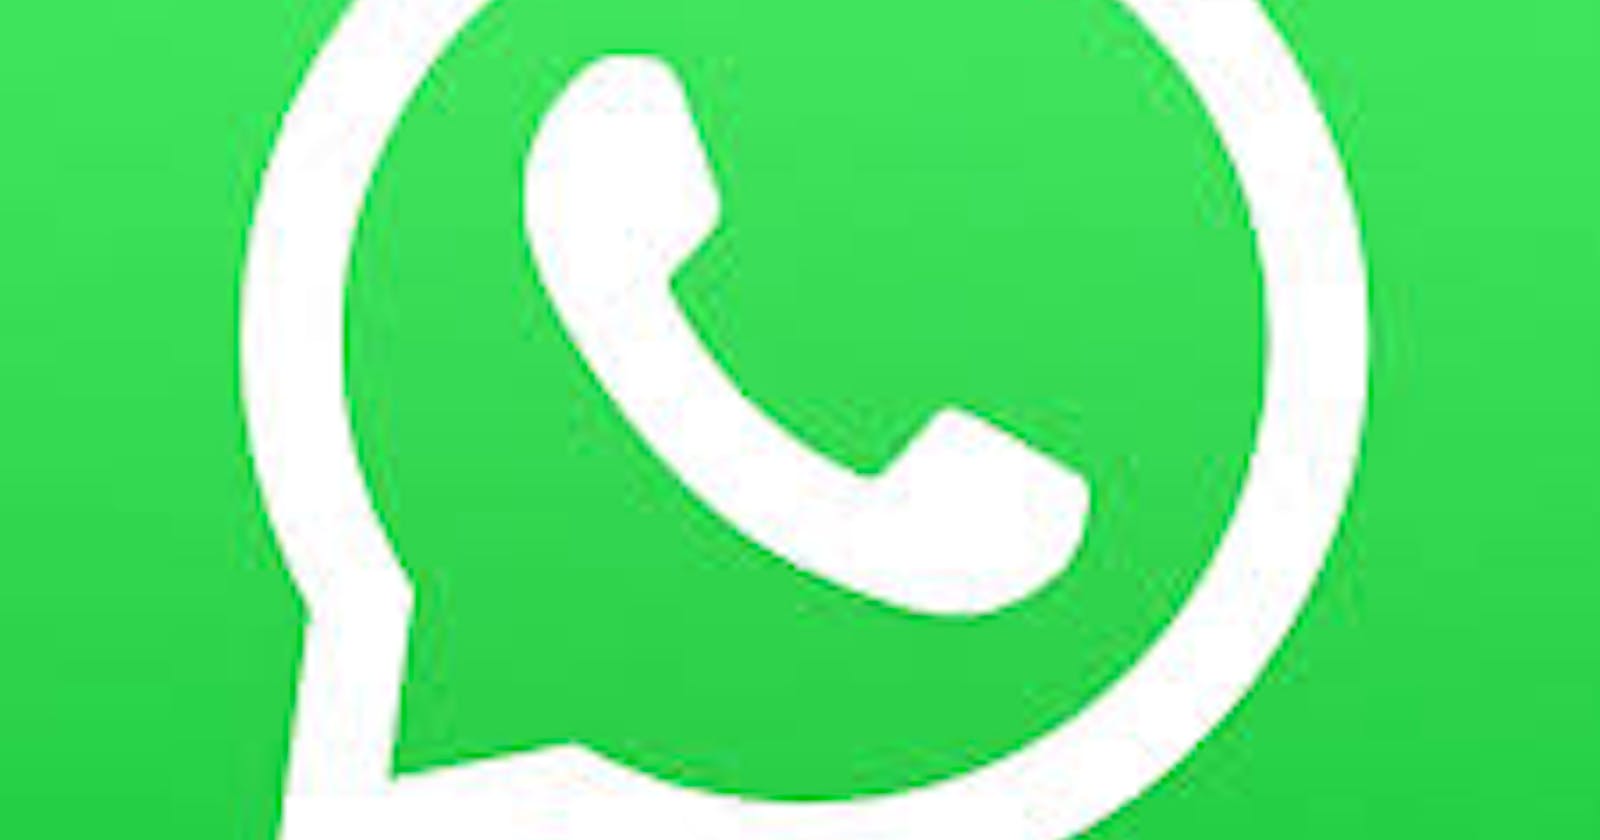 WhatsApp Version 23.0 Release Notes